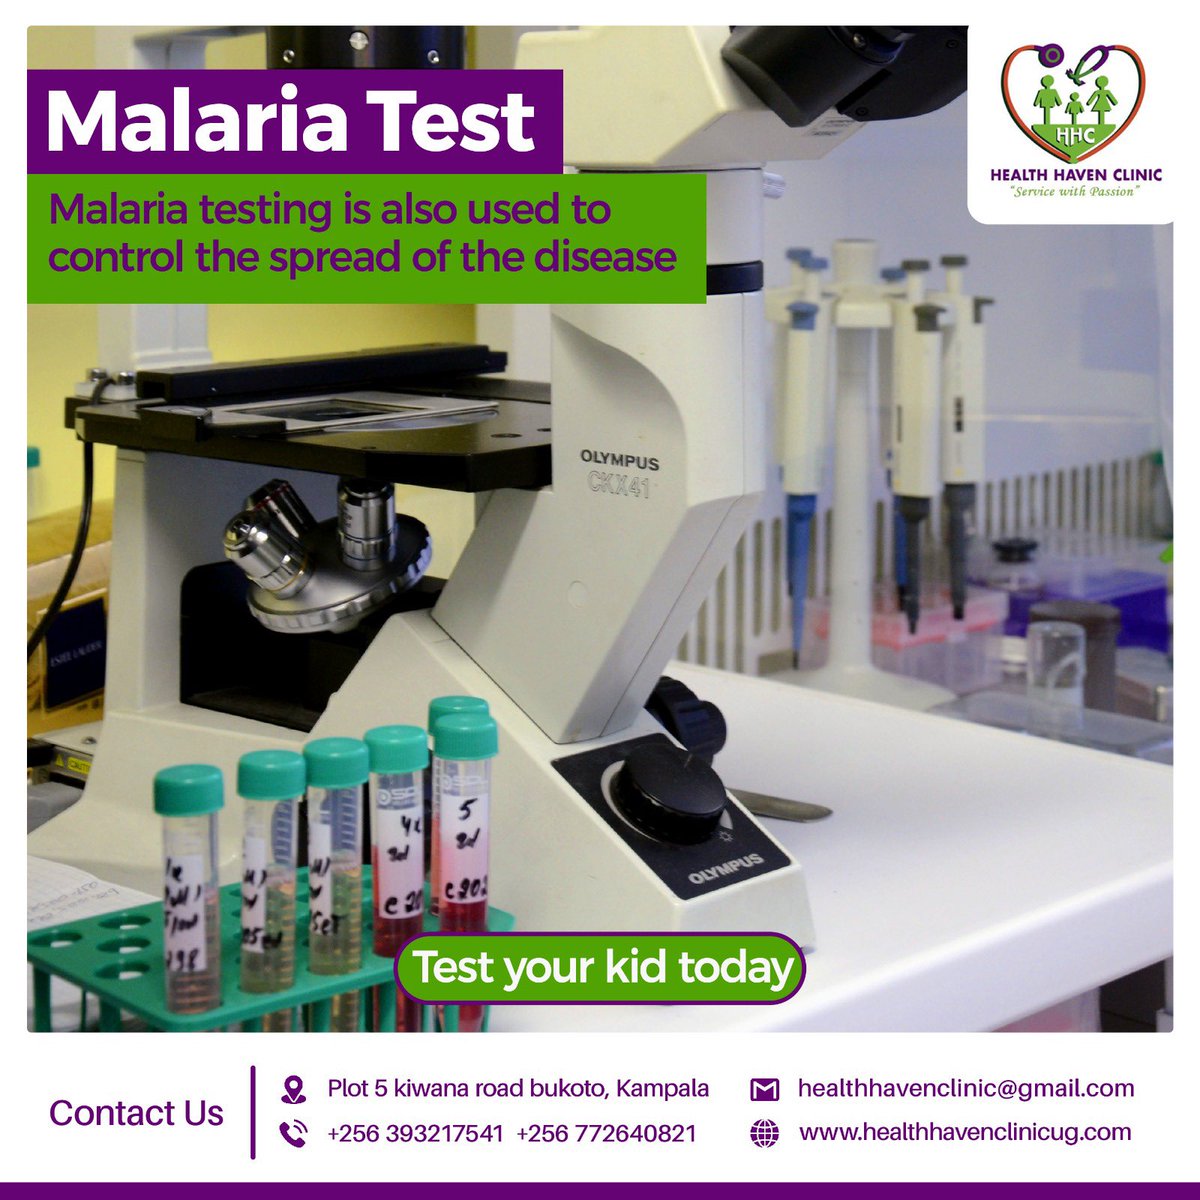 April is all about raising awareness on #Malaria! Don't take chances with your child's health. Bring them to Health Haven Clinic for a quick and easy malaria test today. Let's keep our little ones safe and healthy. #HealthHavenClinicUg